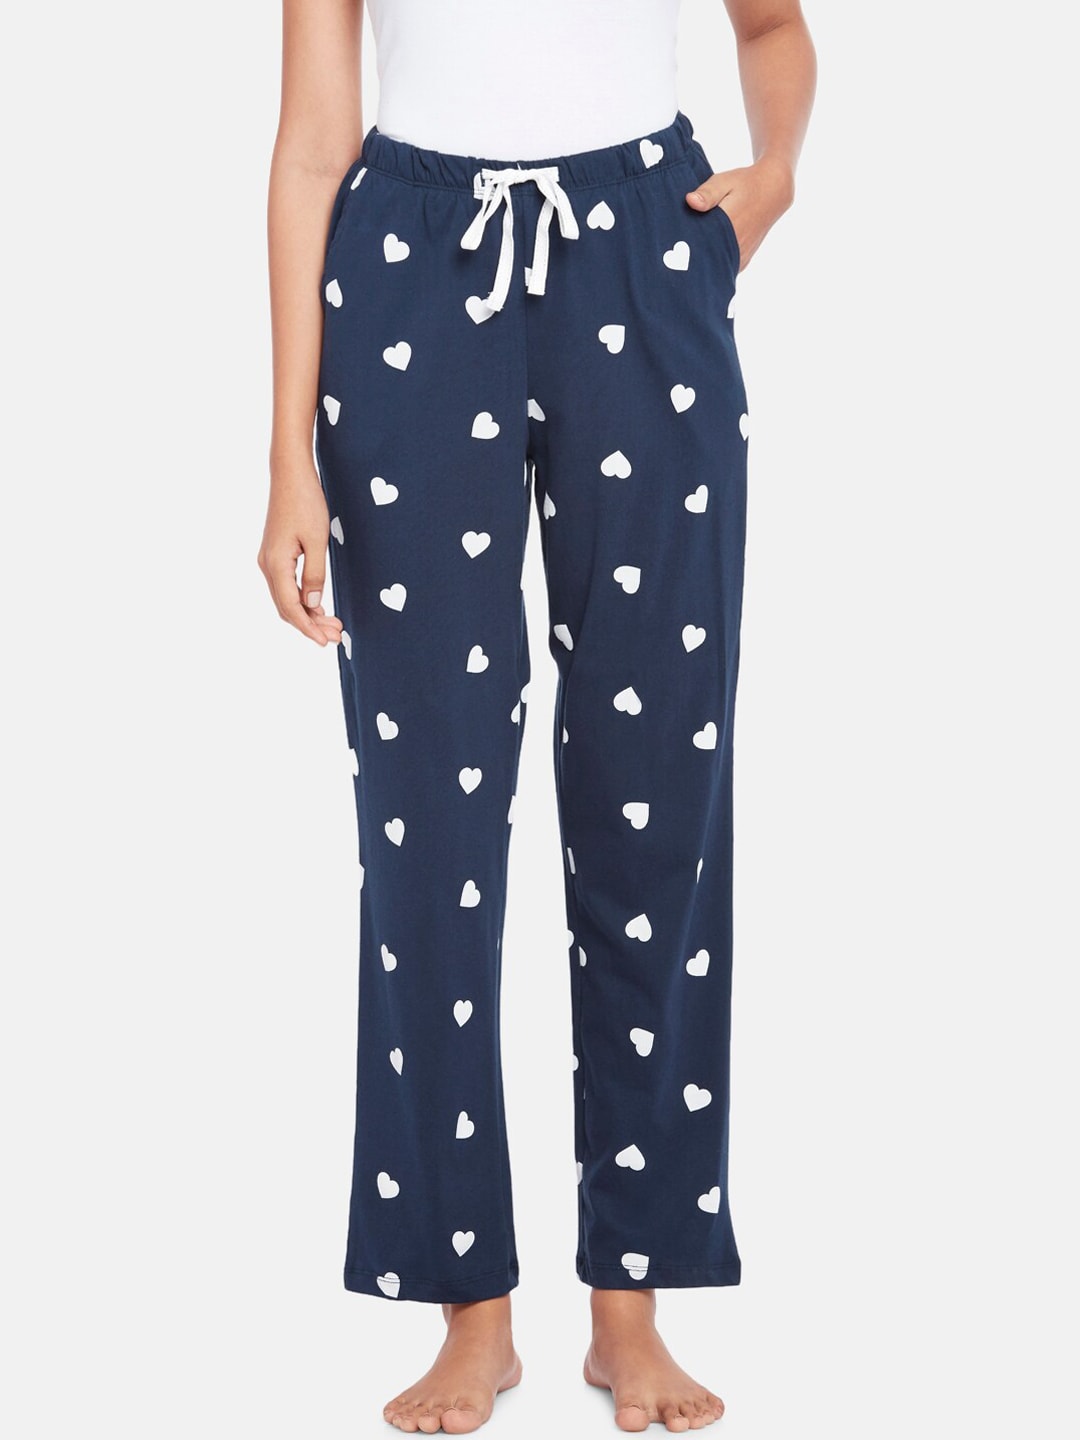 Dreamz by Pantaloons Women Navy Blue & White Printed Pure Cotton Lounge Pants Price in India